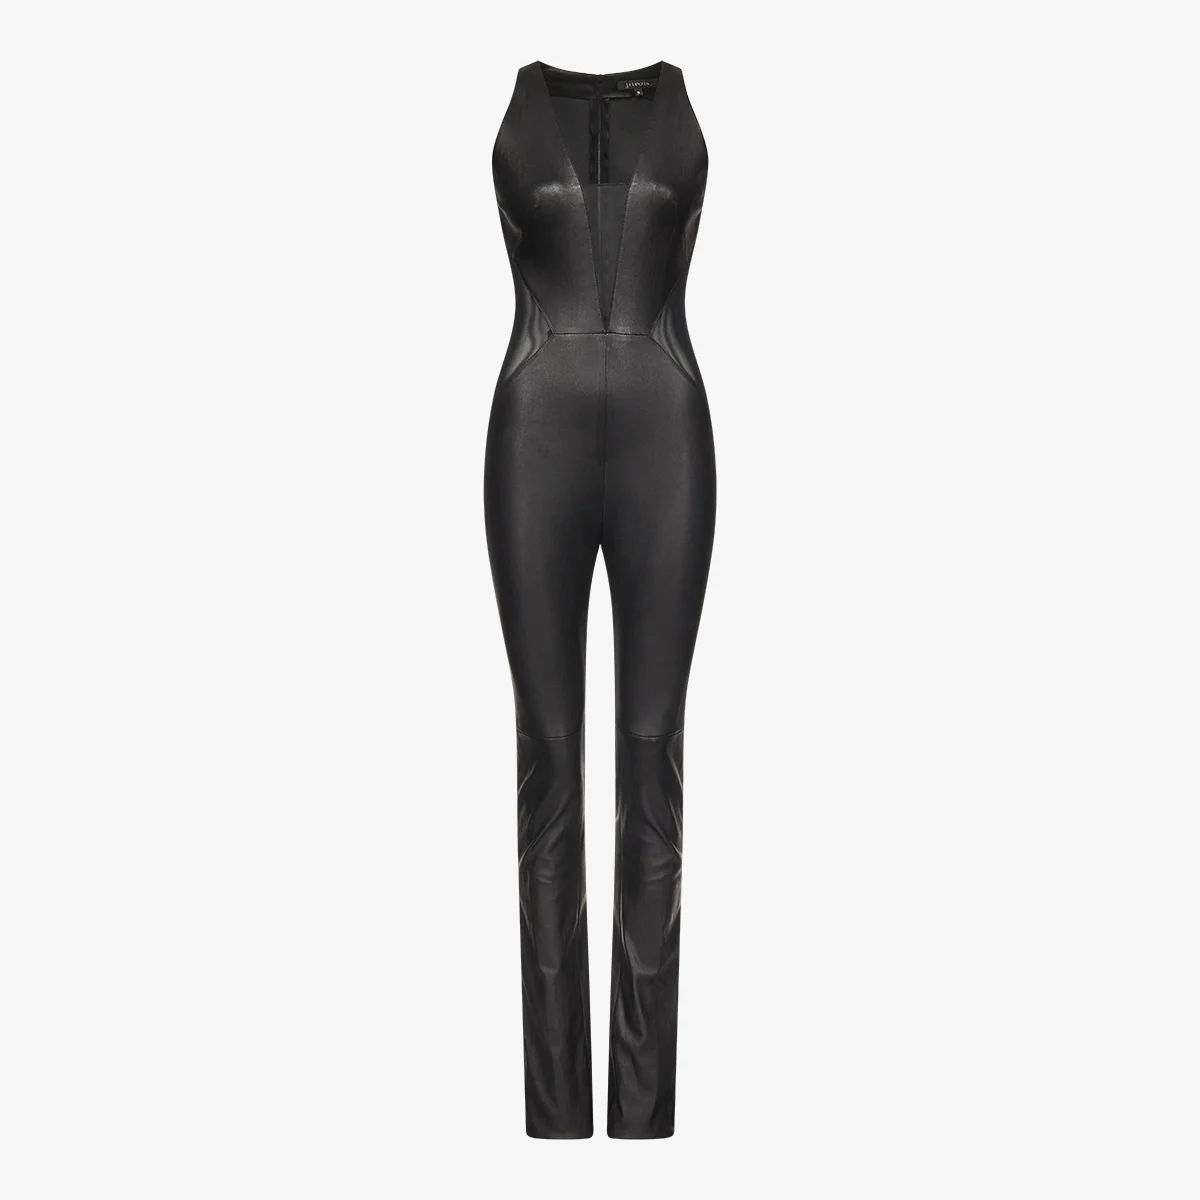 POPPY jumpsuit in stretch leather and mesh in black - packshot